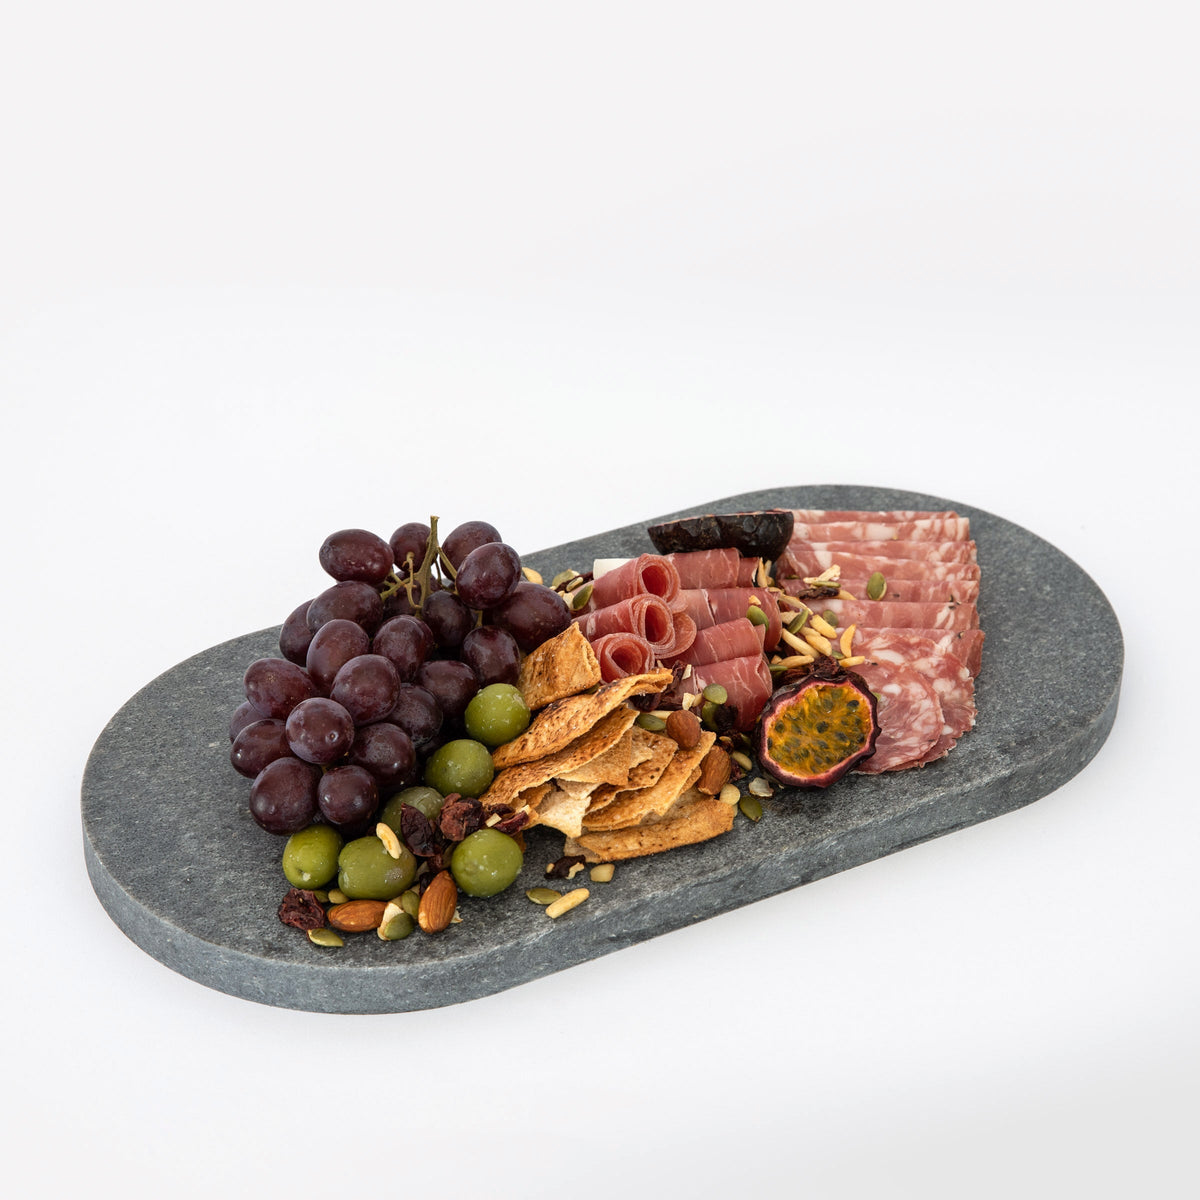 Double arch quartz platters in Caesarstone Rugged Concrete™ created by Aureliia Collection. The Double arch quartz cheese boards shown with salami, prosciutto, Sicilian olives, red grapes, cut passionfruit and pita crackers. An excellent home decor gift for someone who has it all.